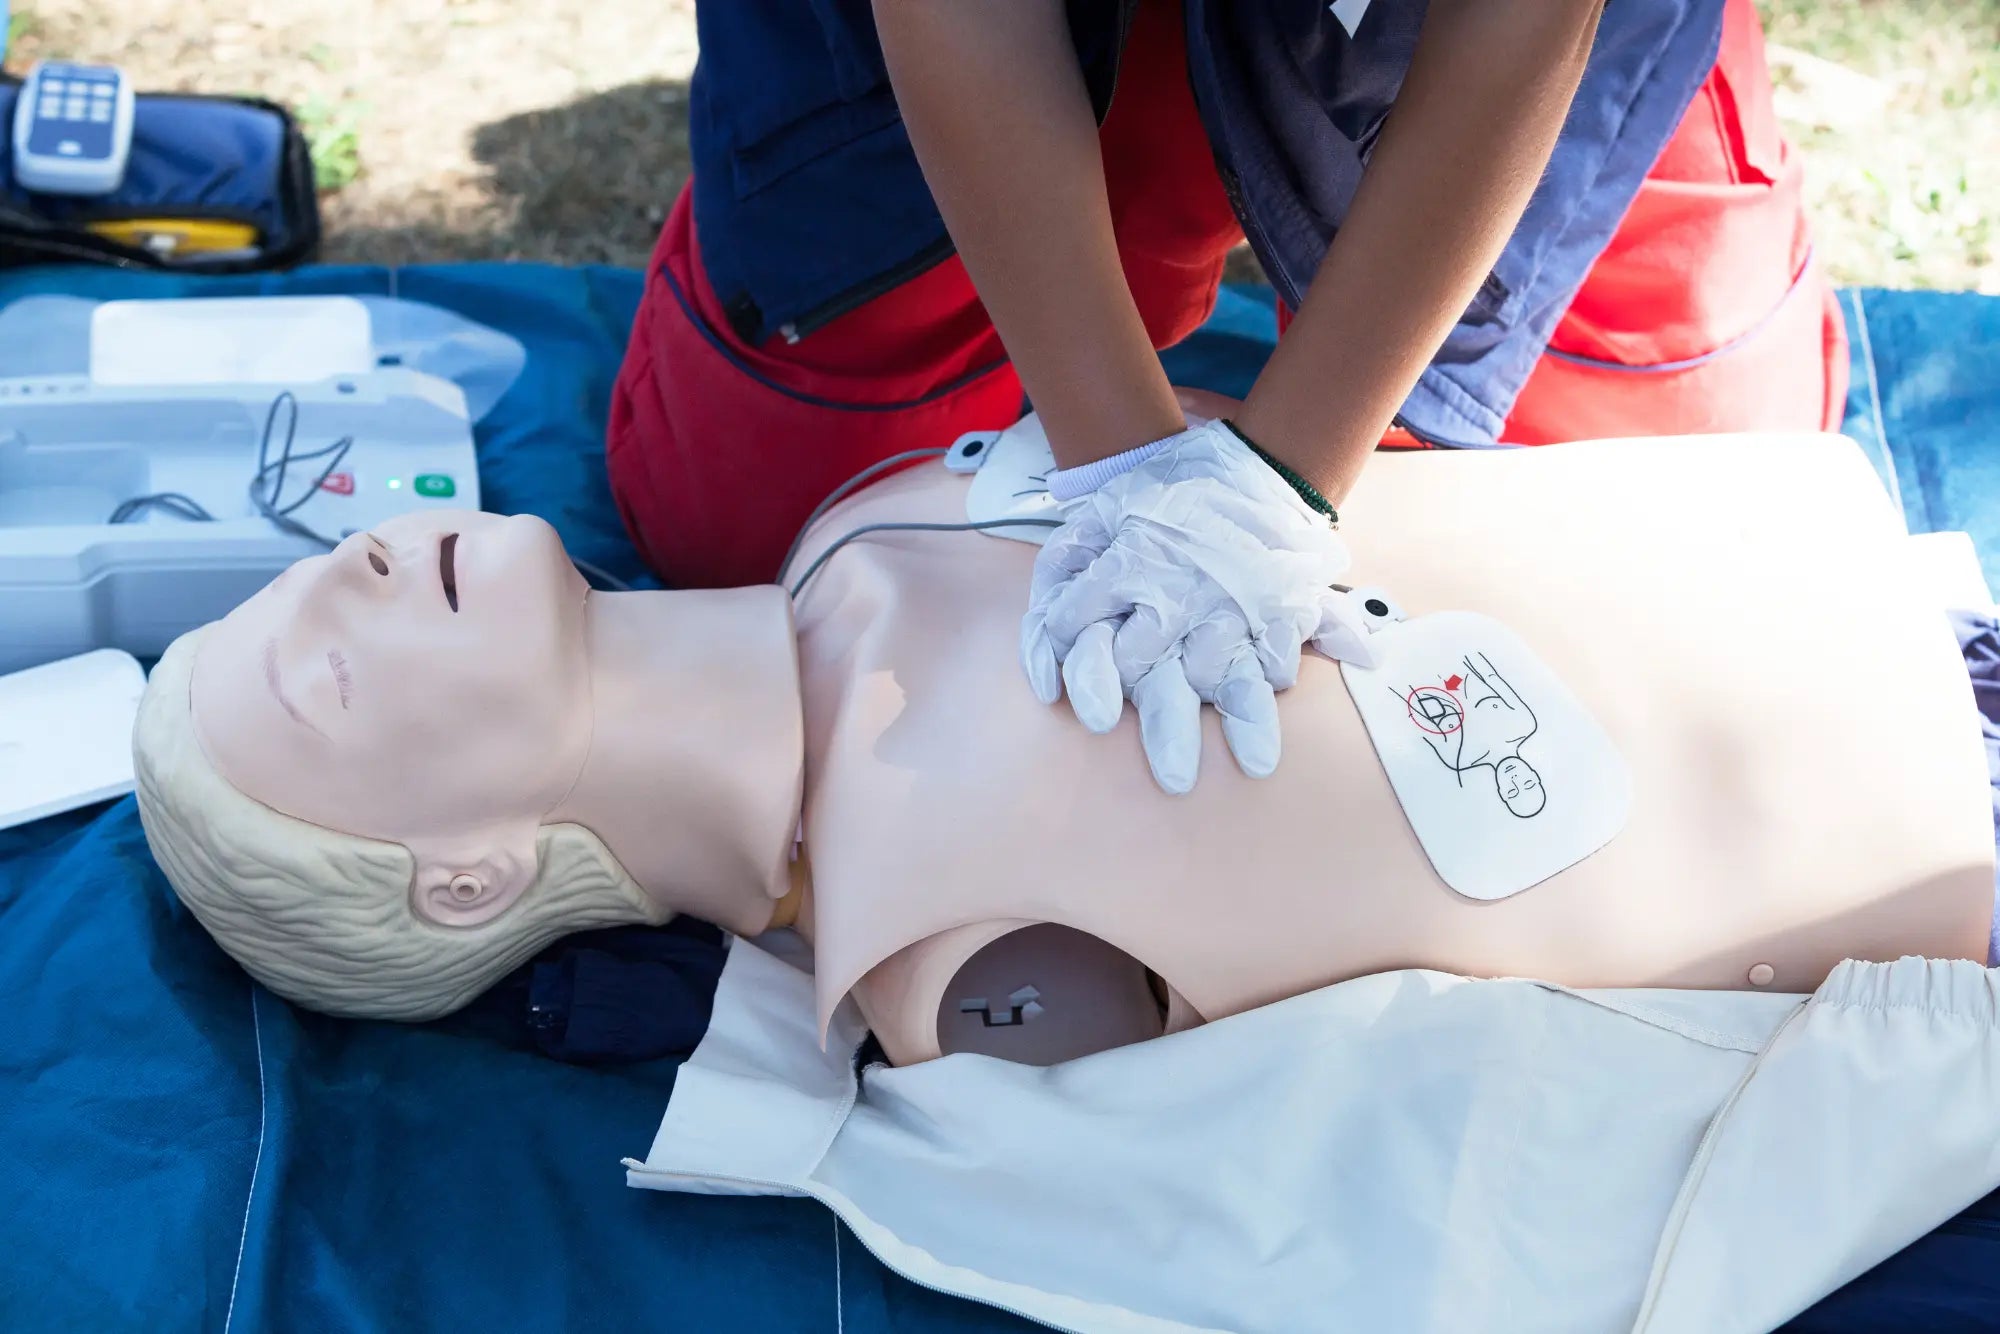 A first resonder is performing CPR on a CPR dummy